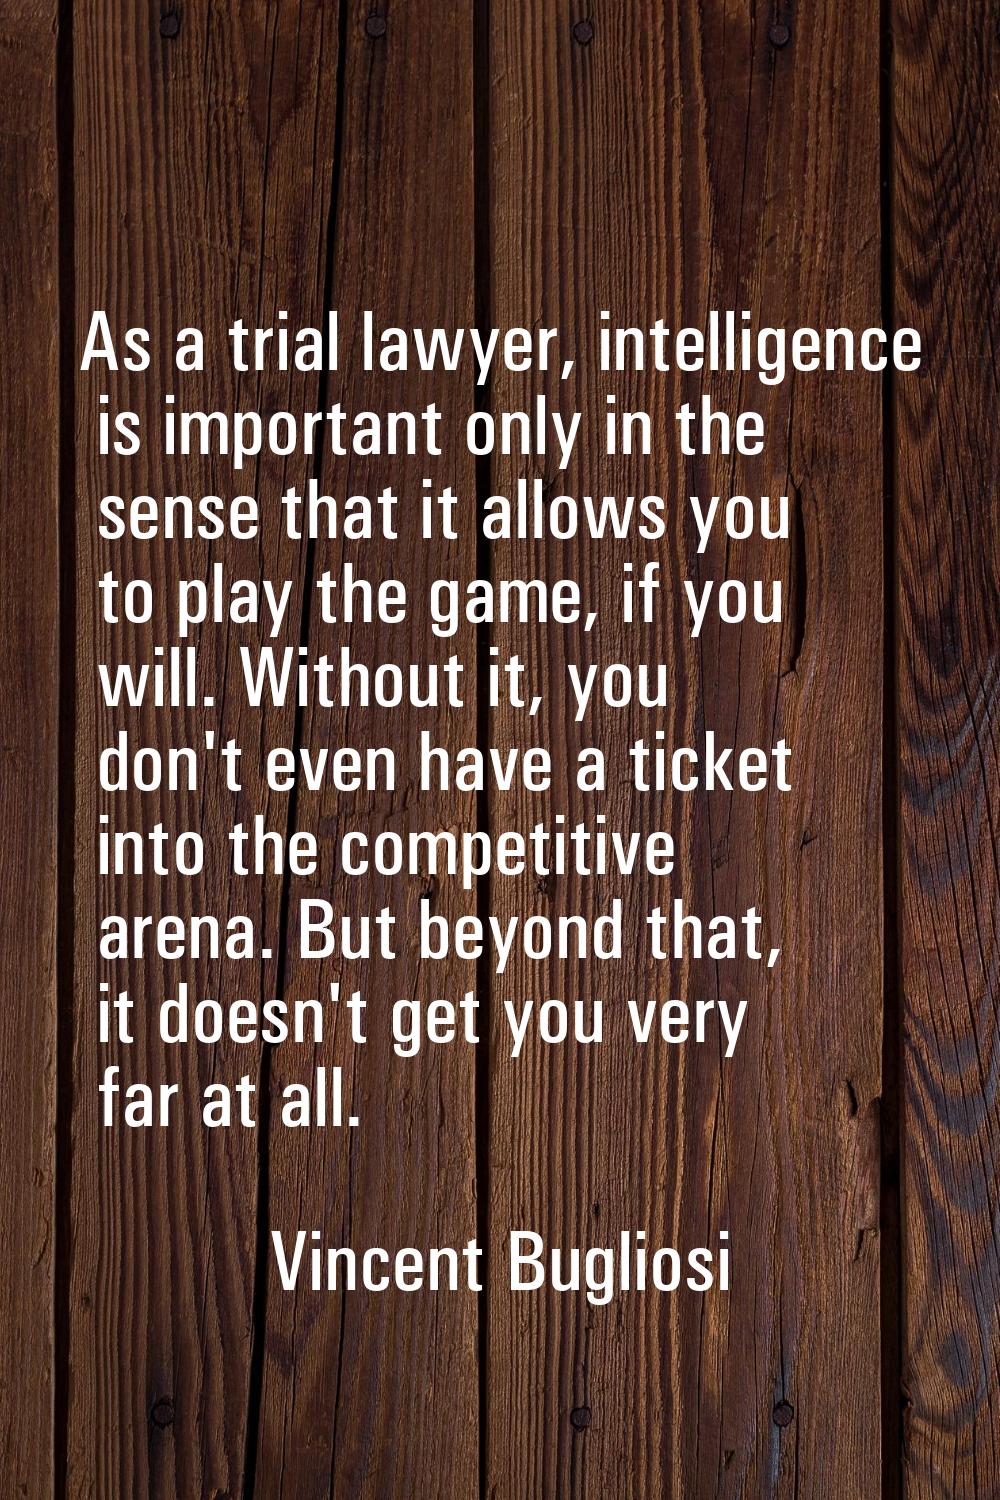 As a trial lawyer, intelligence is important only in the sense that it allows you to play the game,